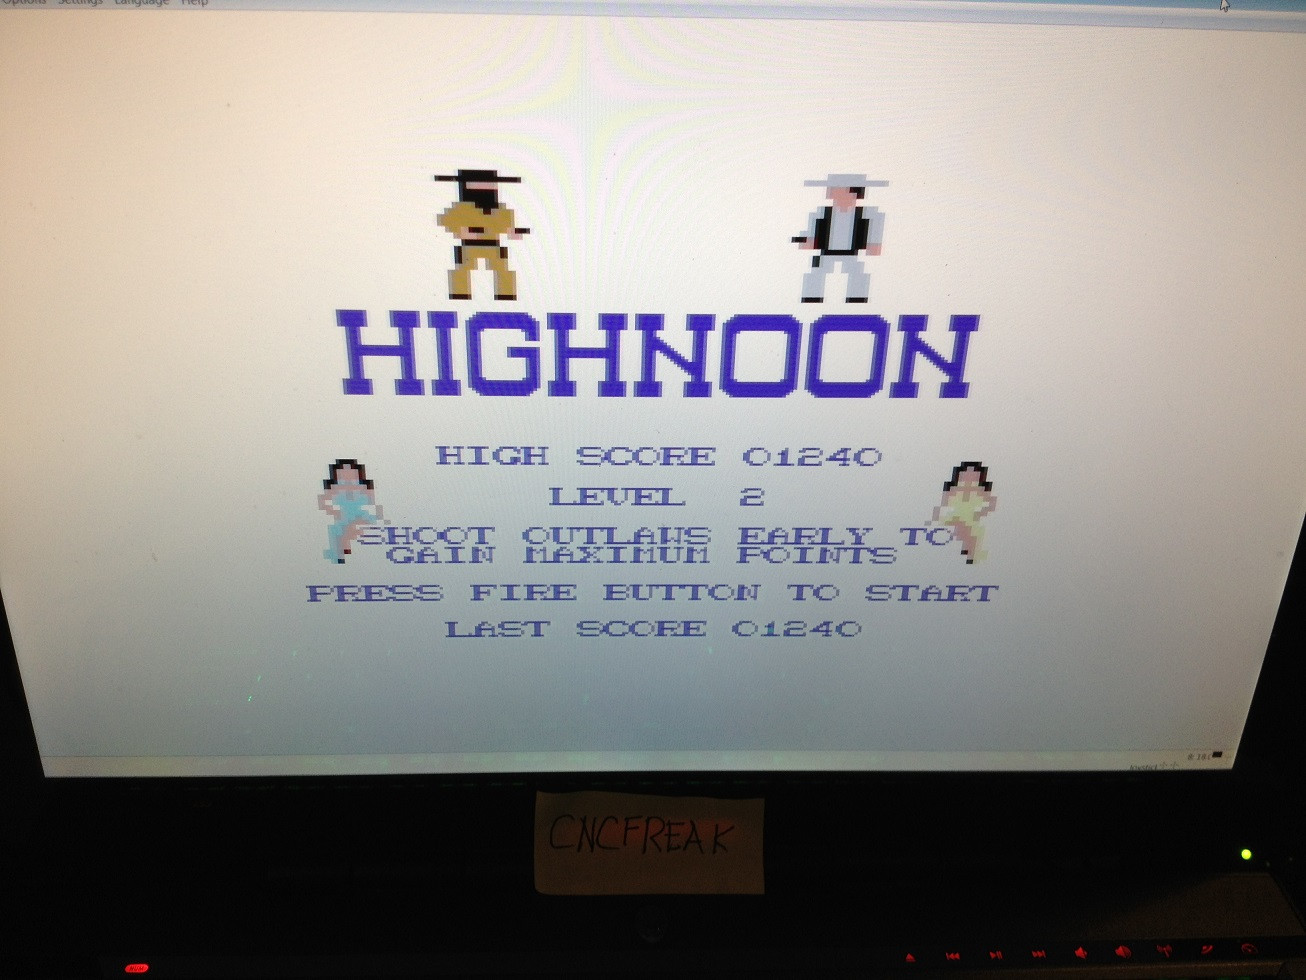 cncfreak: Highnoon (Commodore 64 Emulated) 1,240 points on 2013-10-13 21:00:17